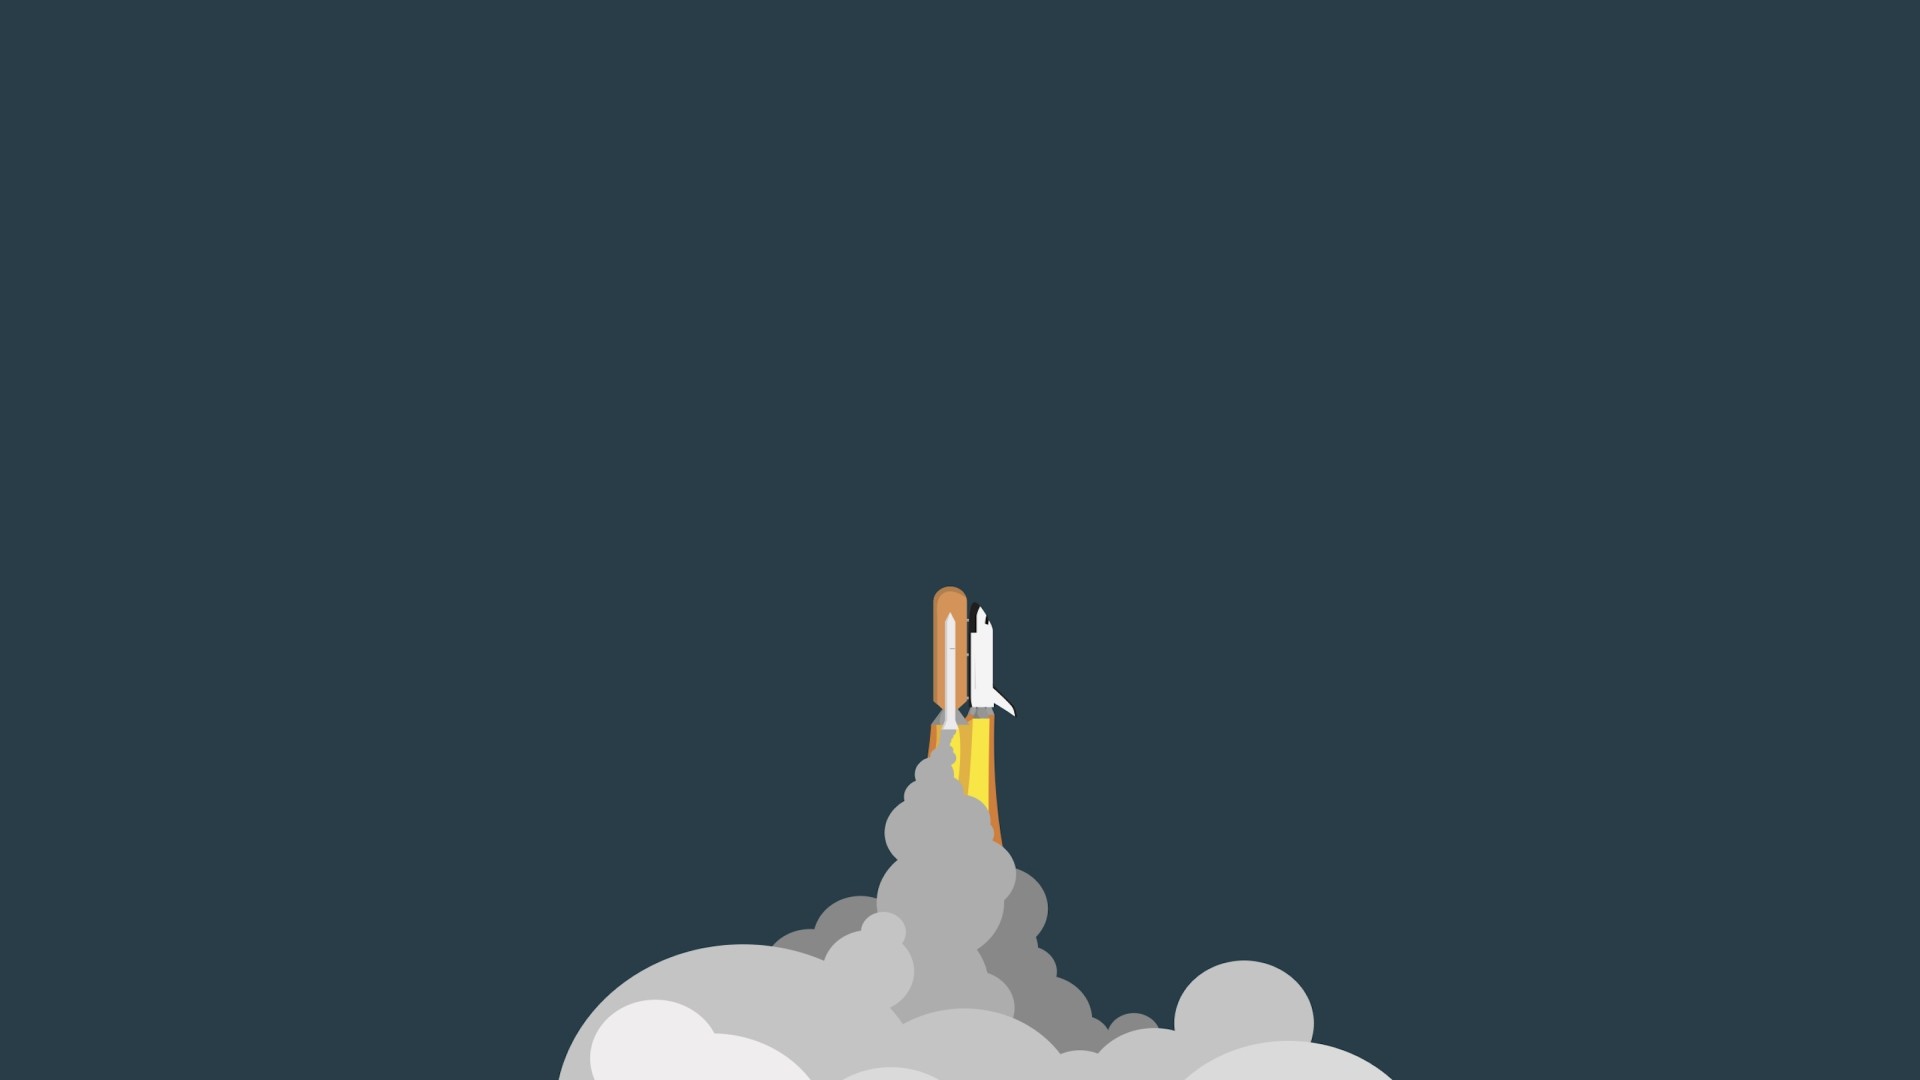 General 1920x1080 space shuttle space artwork simple background vehicle